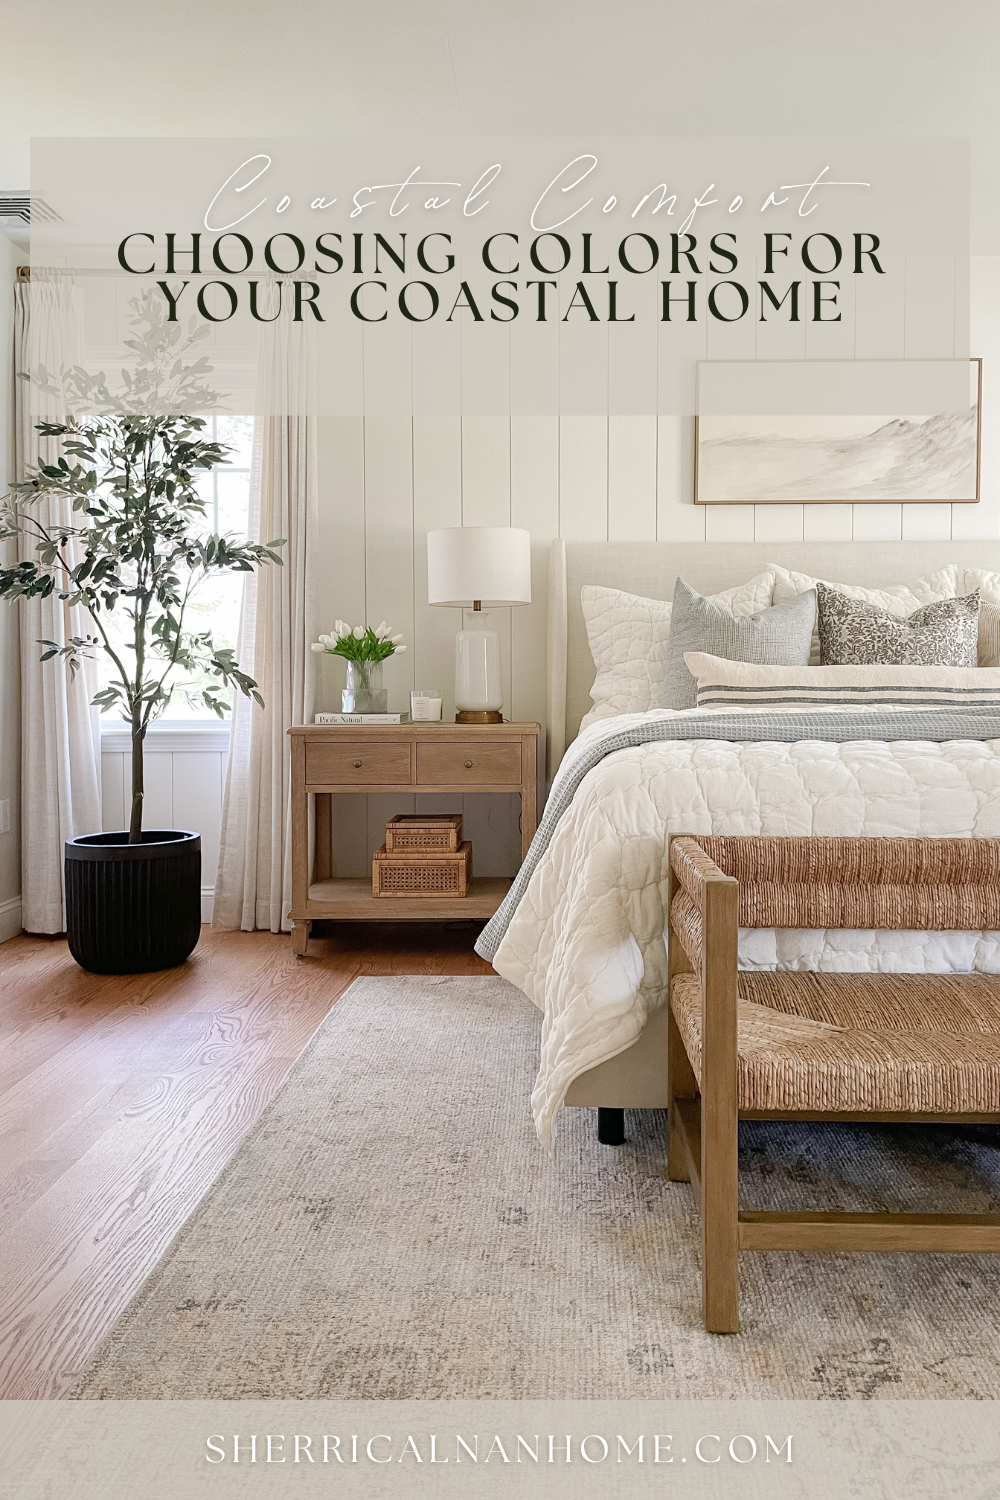 Coastal Comfort, Home decor, Coastal home, textures, colors, wall paint, home finds, wall colors, textured pillows, tiled walls, entryway table, modern finds, table decor, wooven baskets, faux greenery, neutral home, wall textures, how to navigate home decor, how to navigate textures, coastal home decor, coastal finds